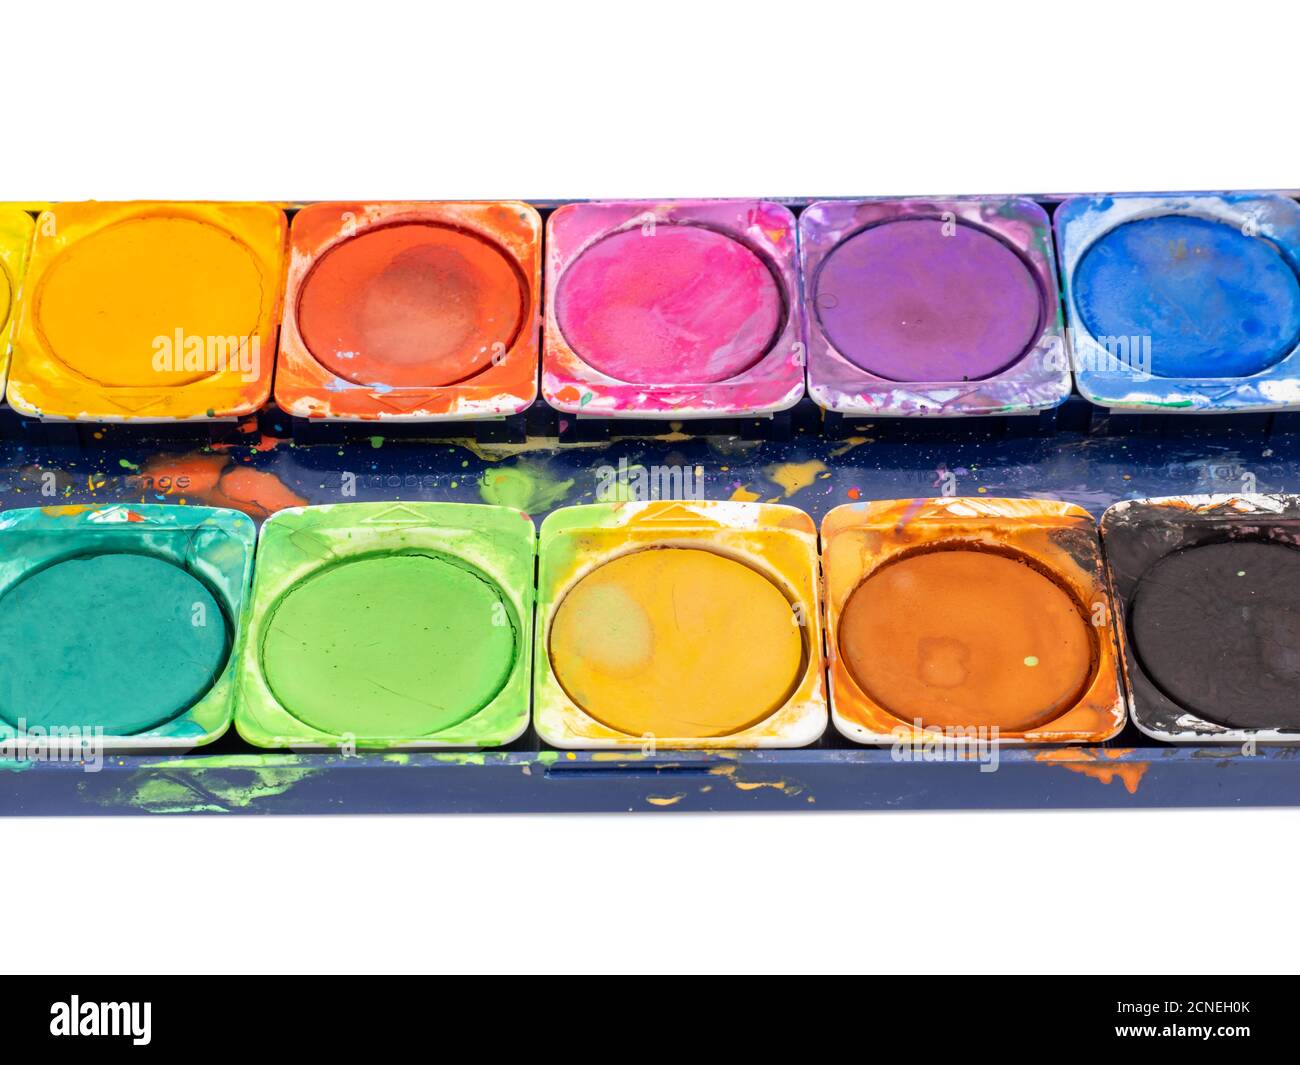 Plan View Of A Watercolor Paint Box Stock Photo, Picture and Royalty Free  Image. Image 14668562.